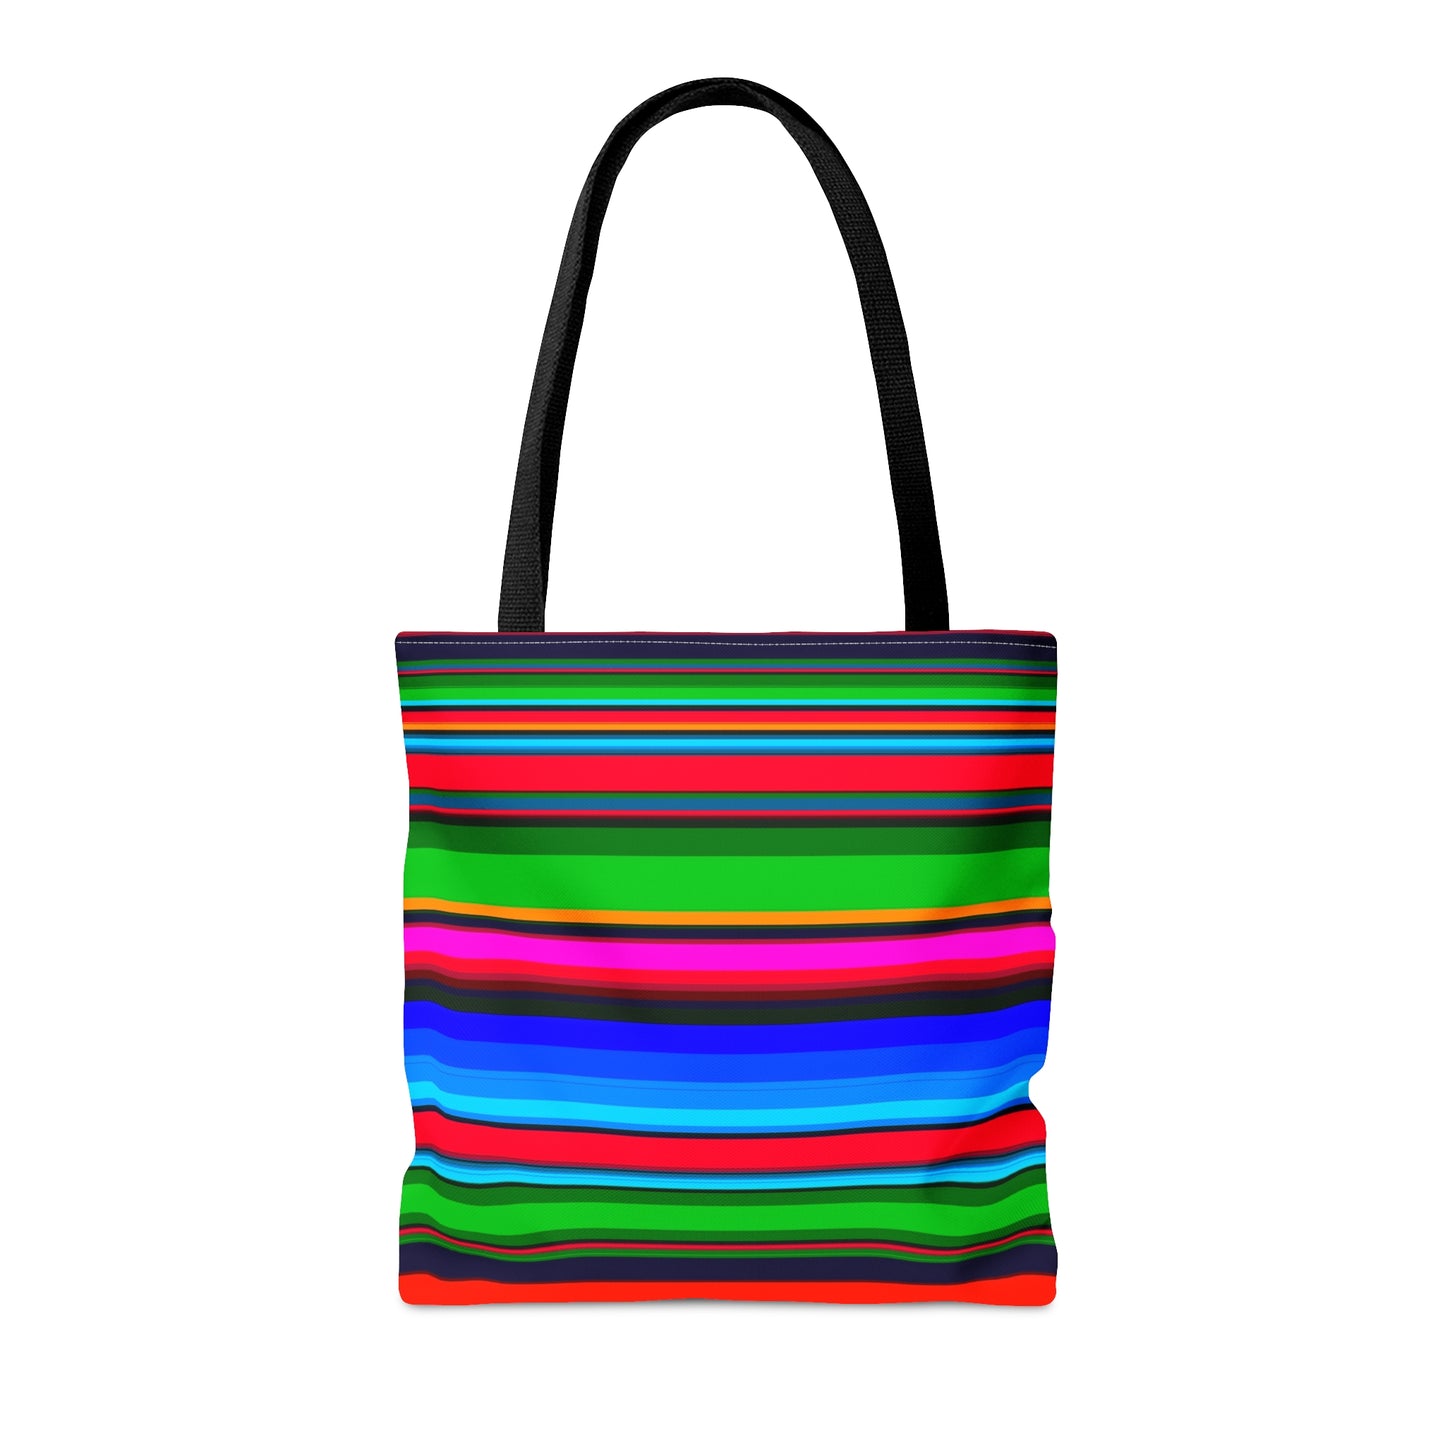 Colorful Serape Tote Bag, Striped Serape Tote Bag, Storage Bag, Gifts For Her, Gifts For Mom, Book Bag, Mom Birthday, Teacher Gifts